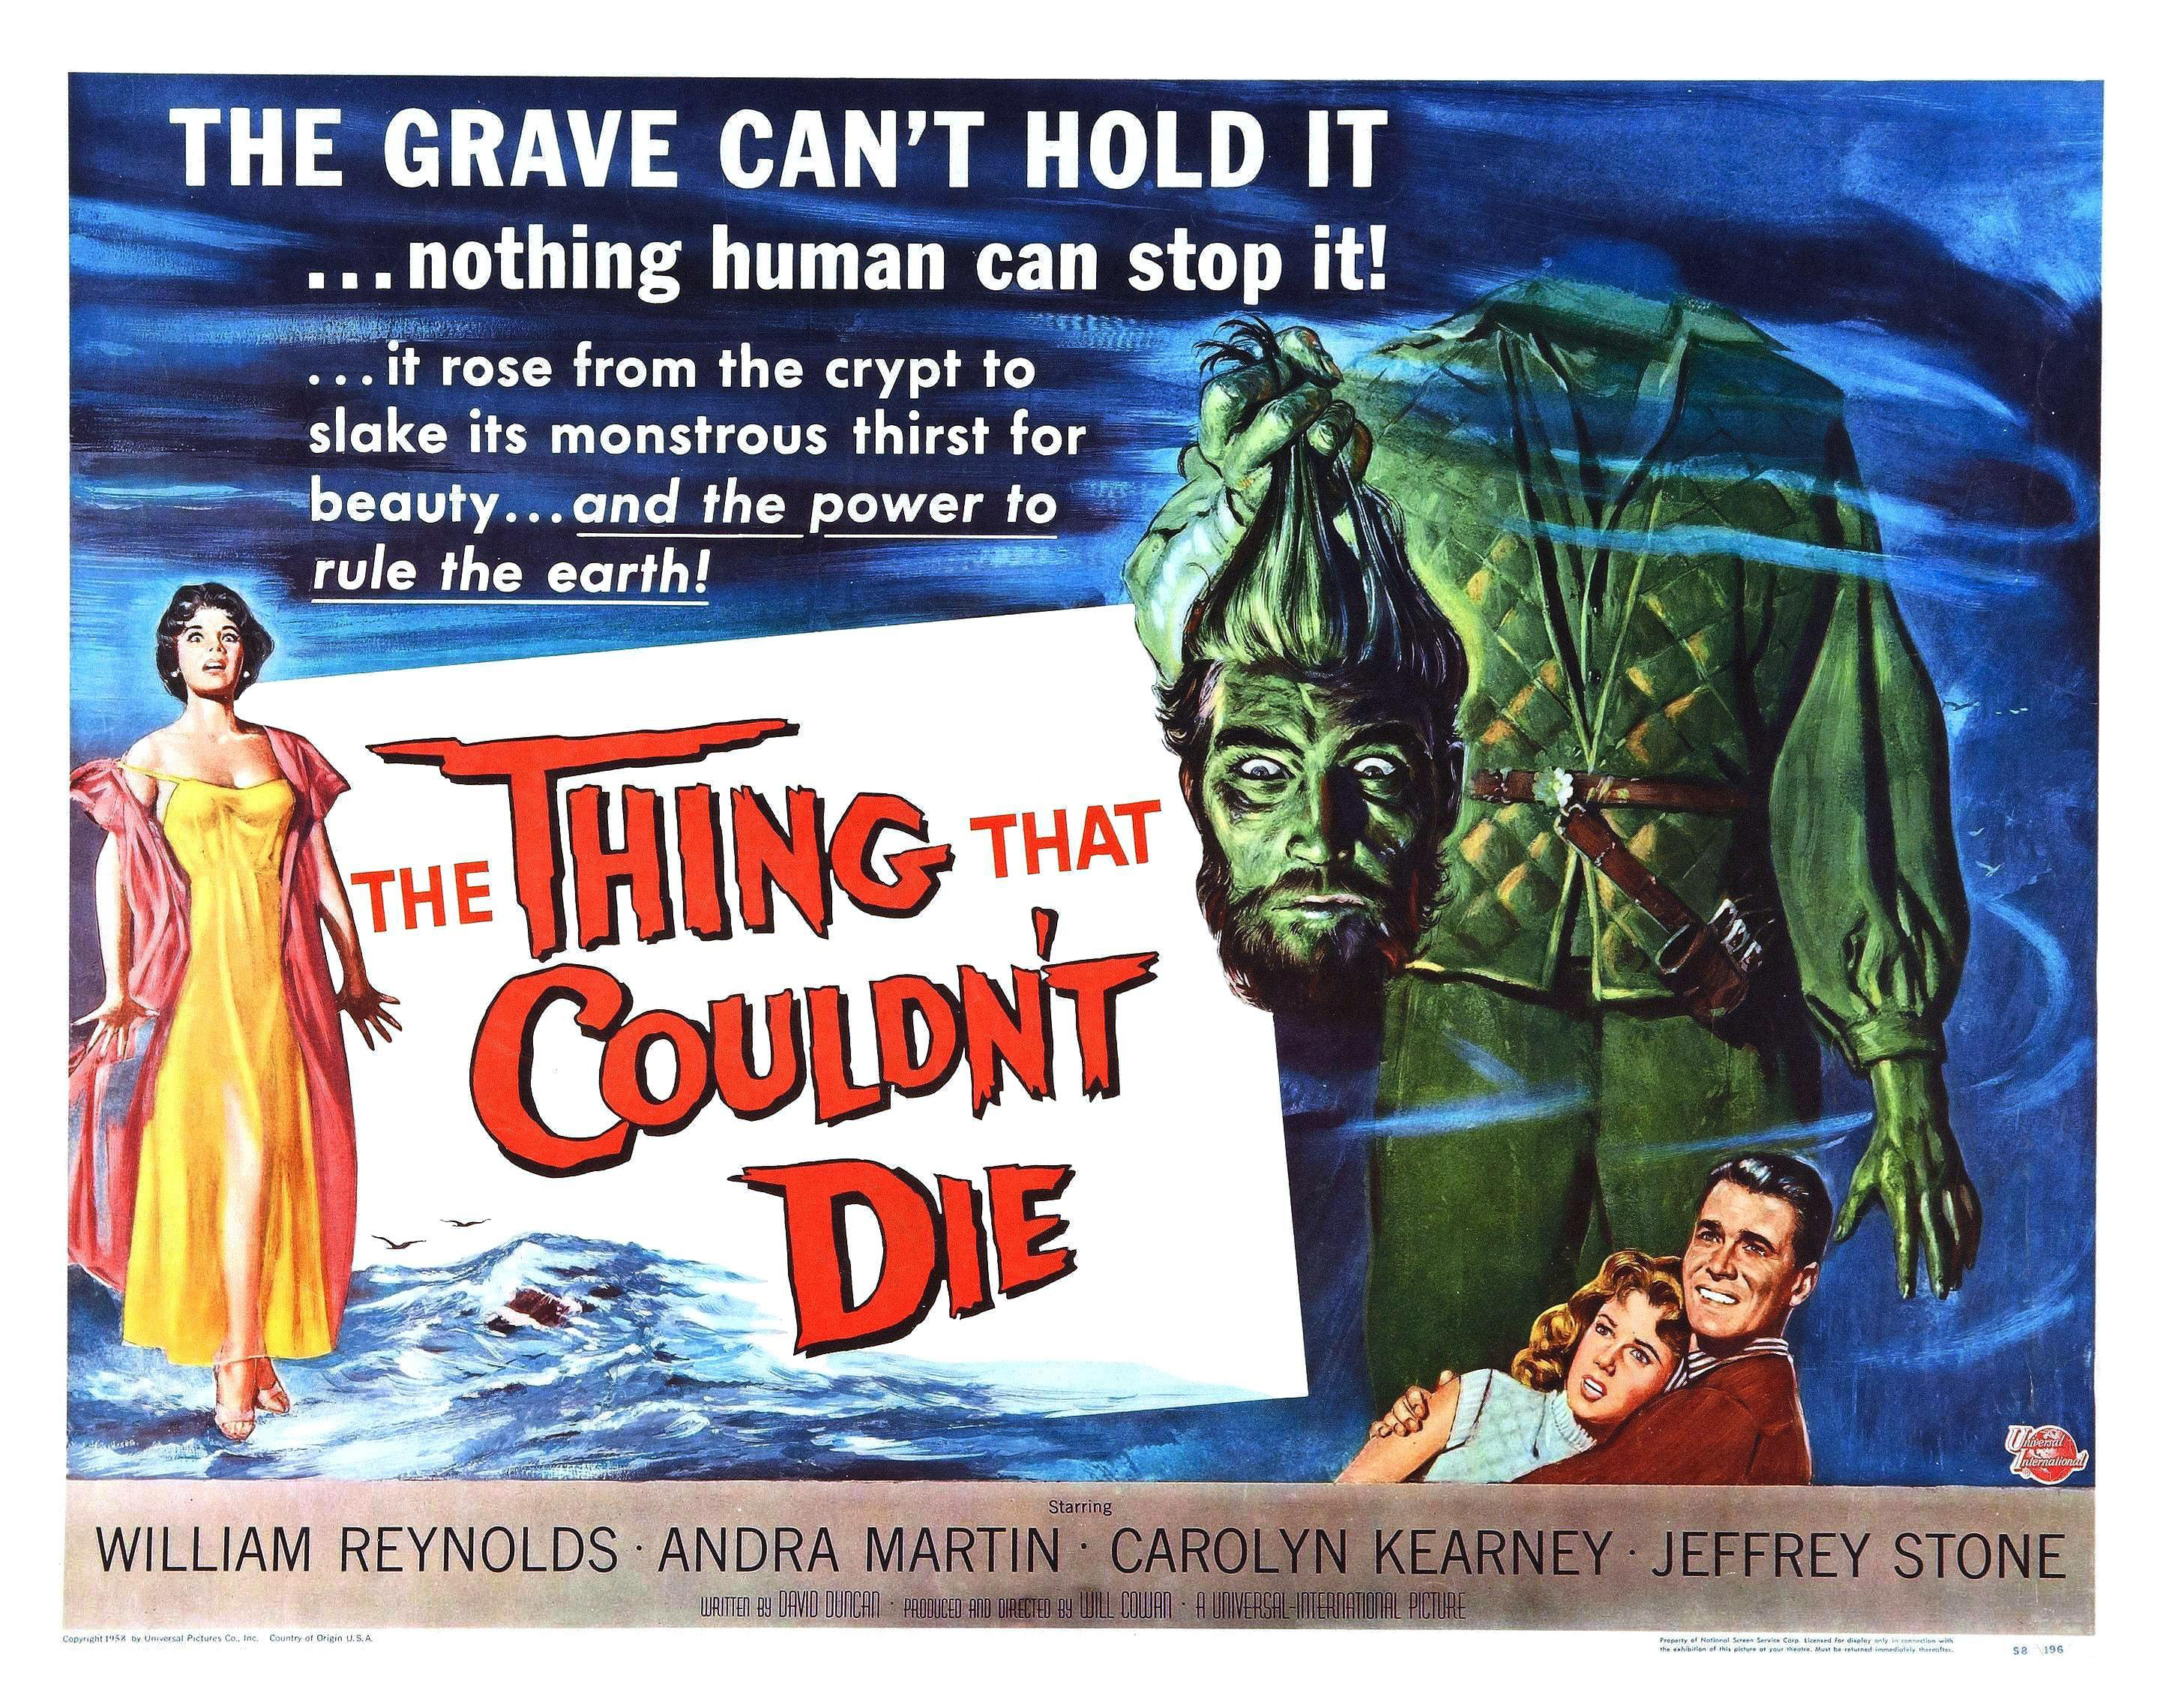 The Thing That Couldn’t Die (1958)